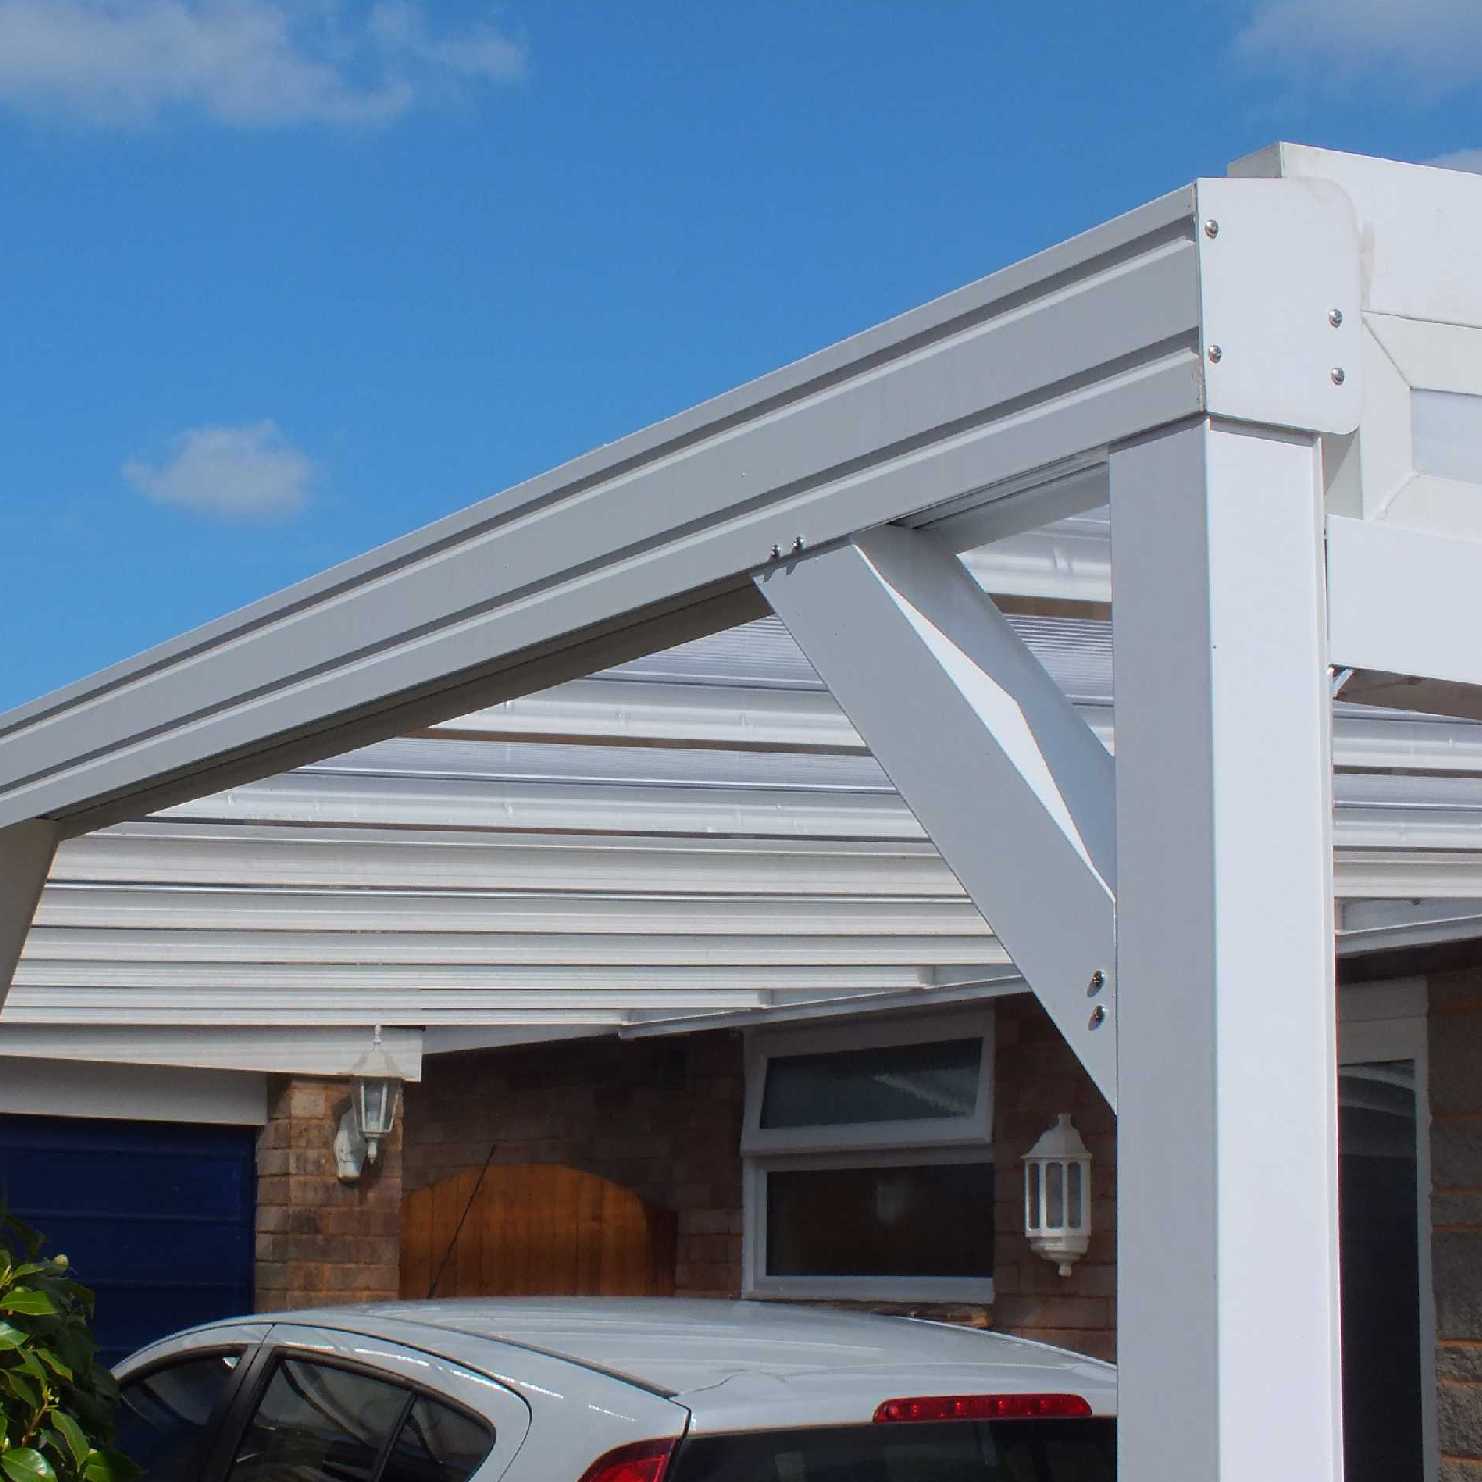 Great deals on Omega Smart Lean-To Canopy, White with 16mm Polycarbonate Glazing - 9.9m (W) x 3.5m (P), (5) Supporting Posts